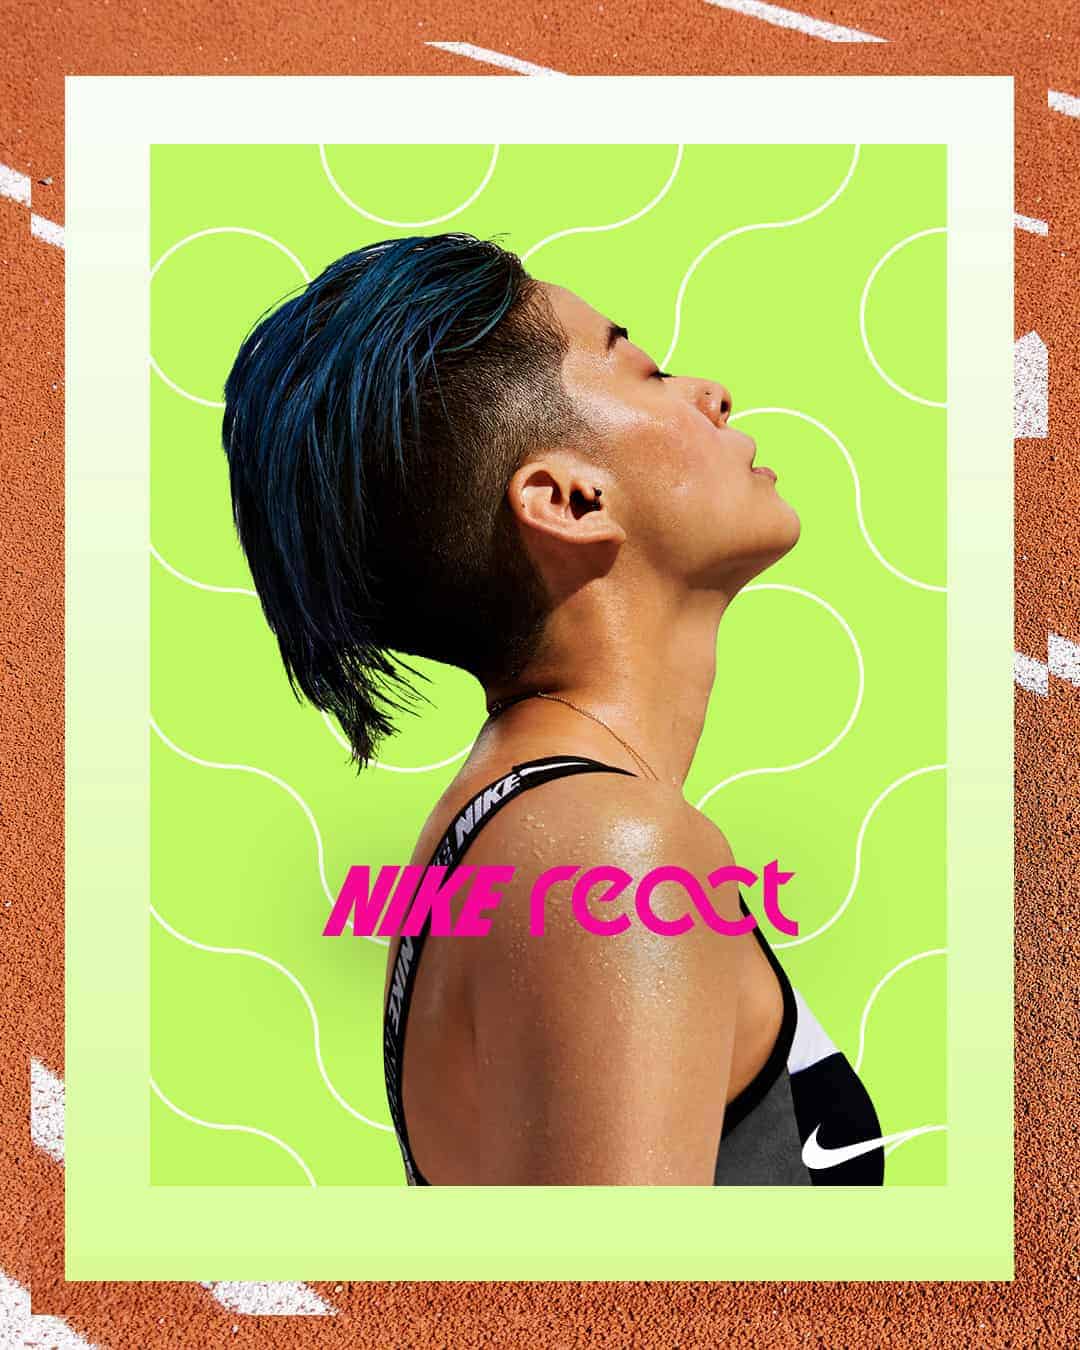 Tran La x Conscious Minds – Nike React IG Typographic Poster Campaign 2 (3)